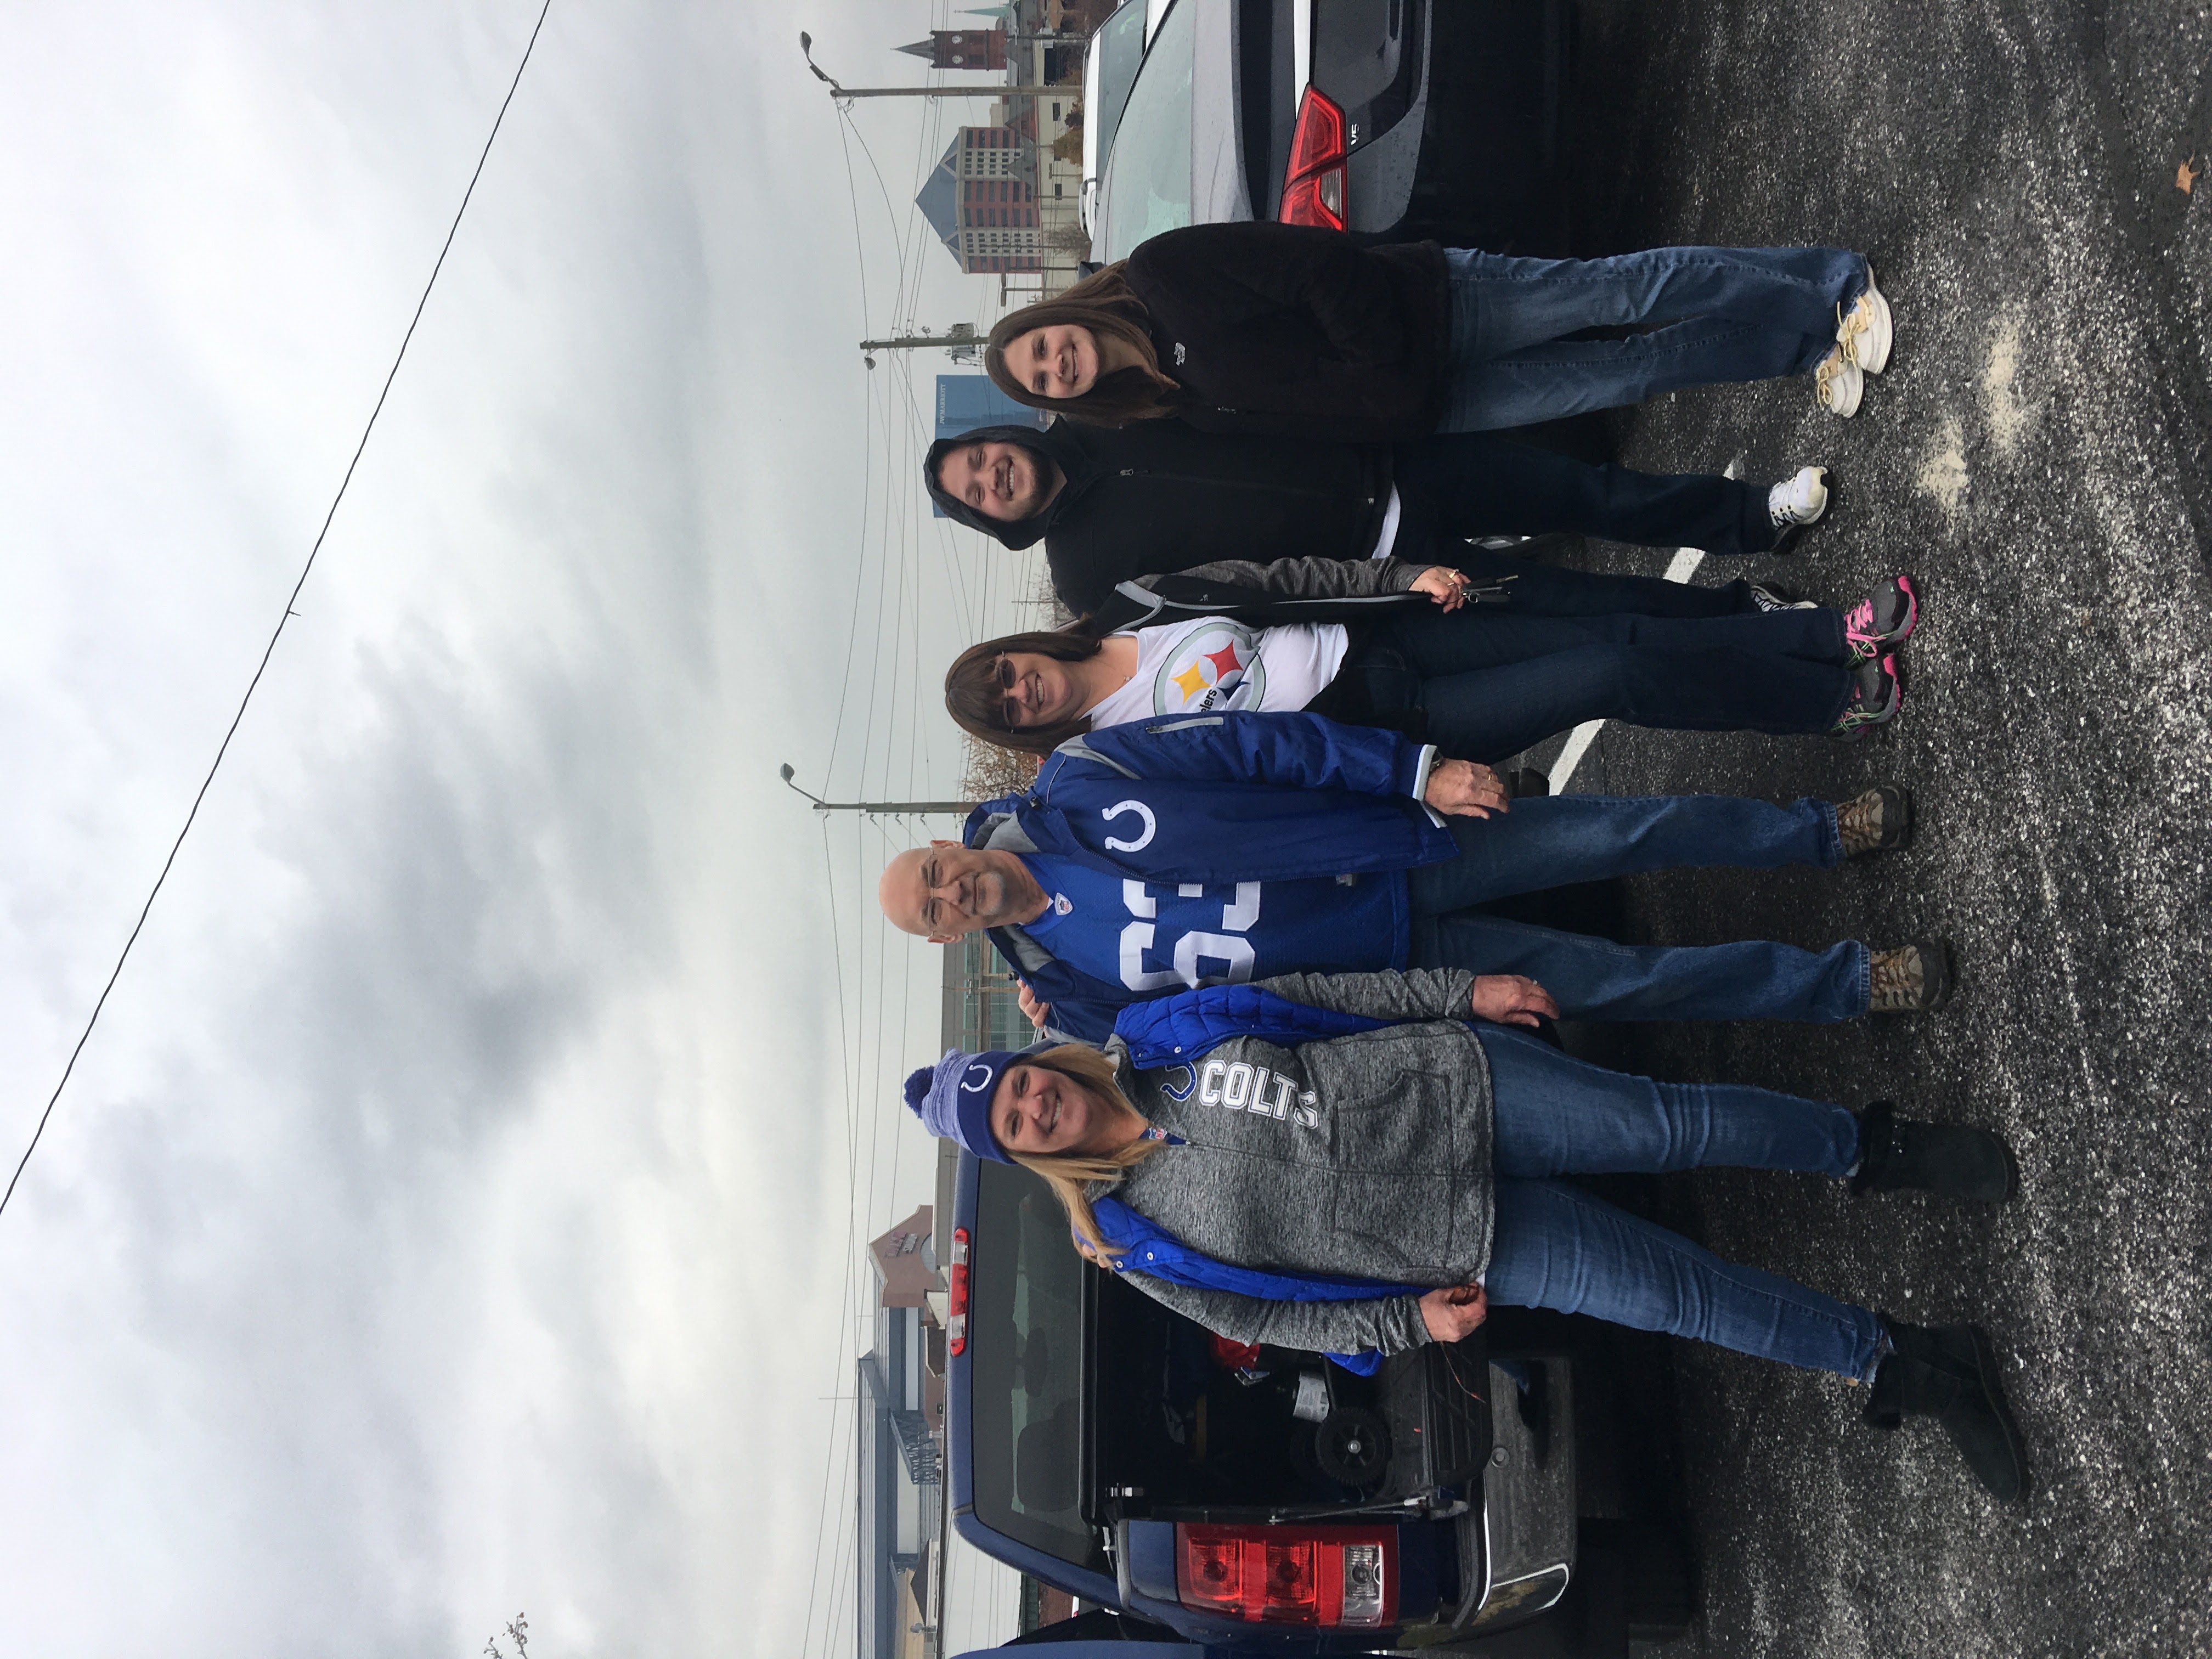 Sandy with Indianapolis Colts fans.